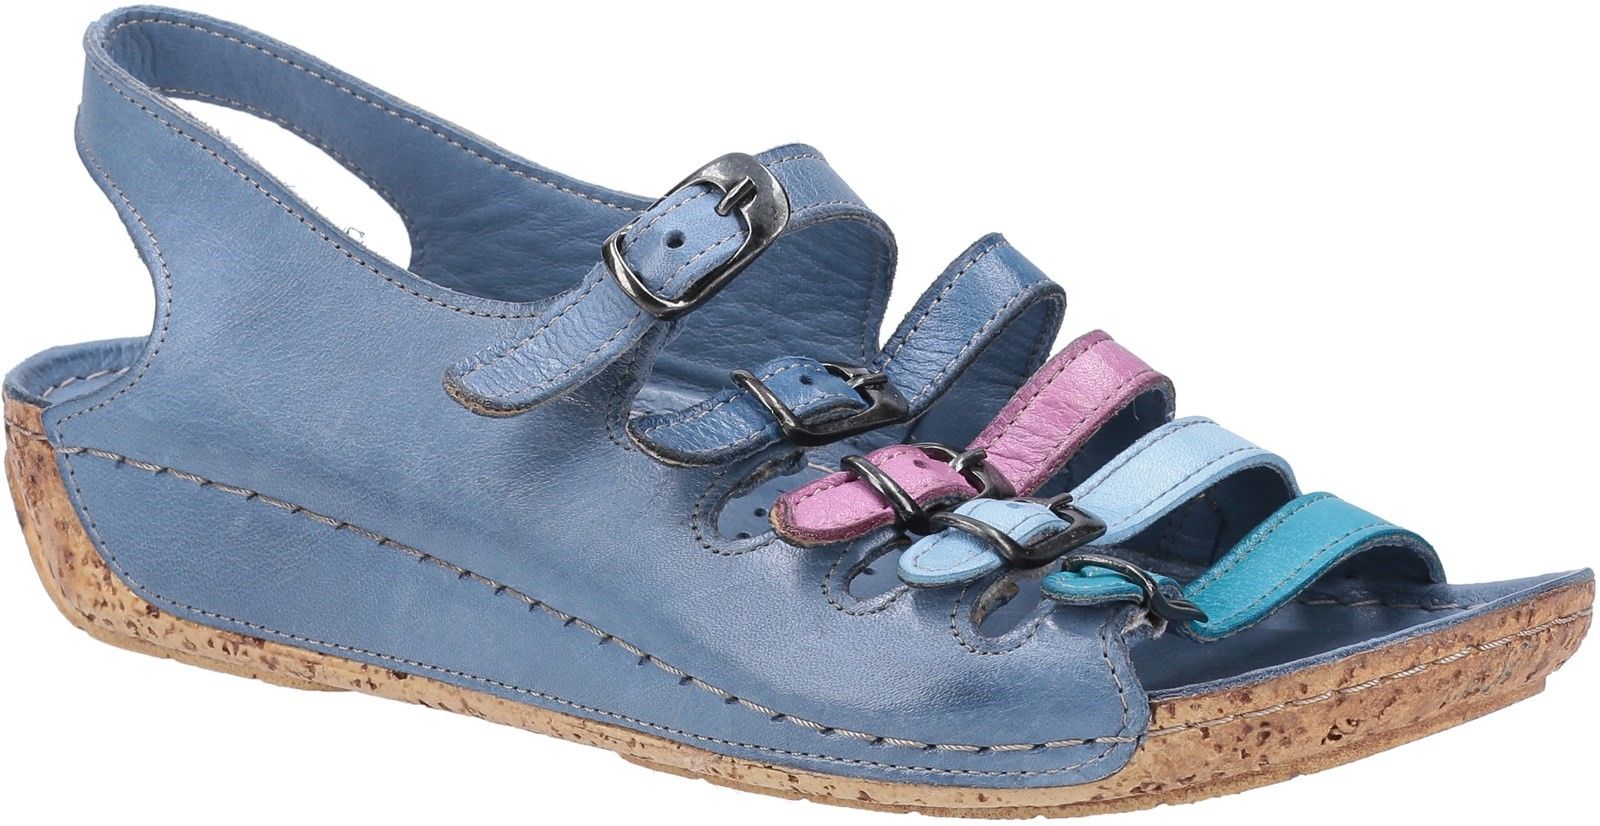 Elegant casual open toe sandal smooth leather uppers. Five adjustable multicoloured buckle straps and a lightweight cork wedge heel providing comfort and style. Open back and toe sandal. 
Lightweight cork sole unit. 
Five adjustable coloured straps.